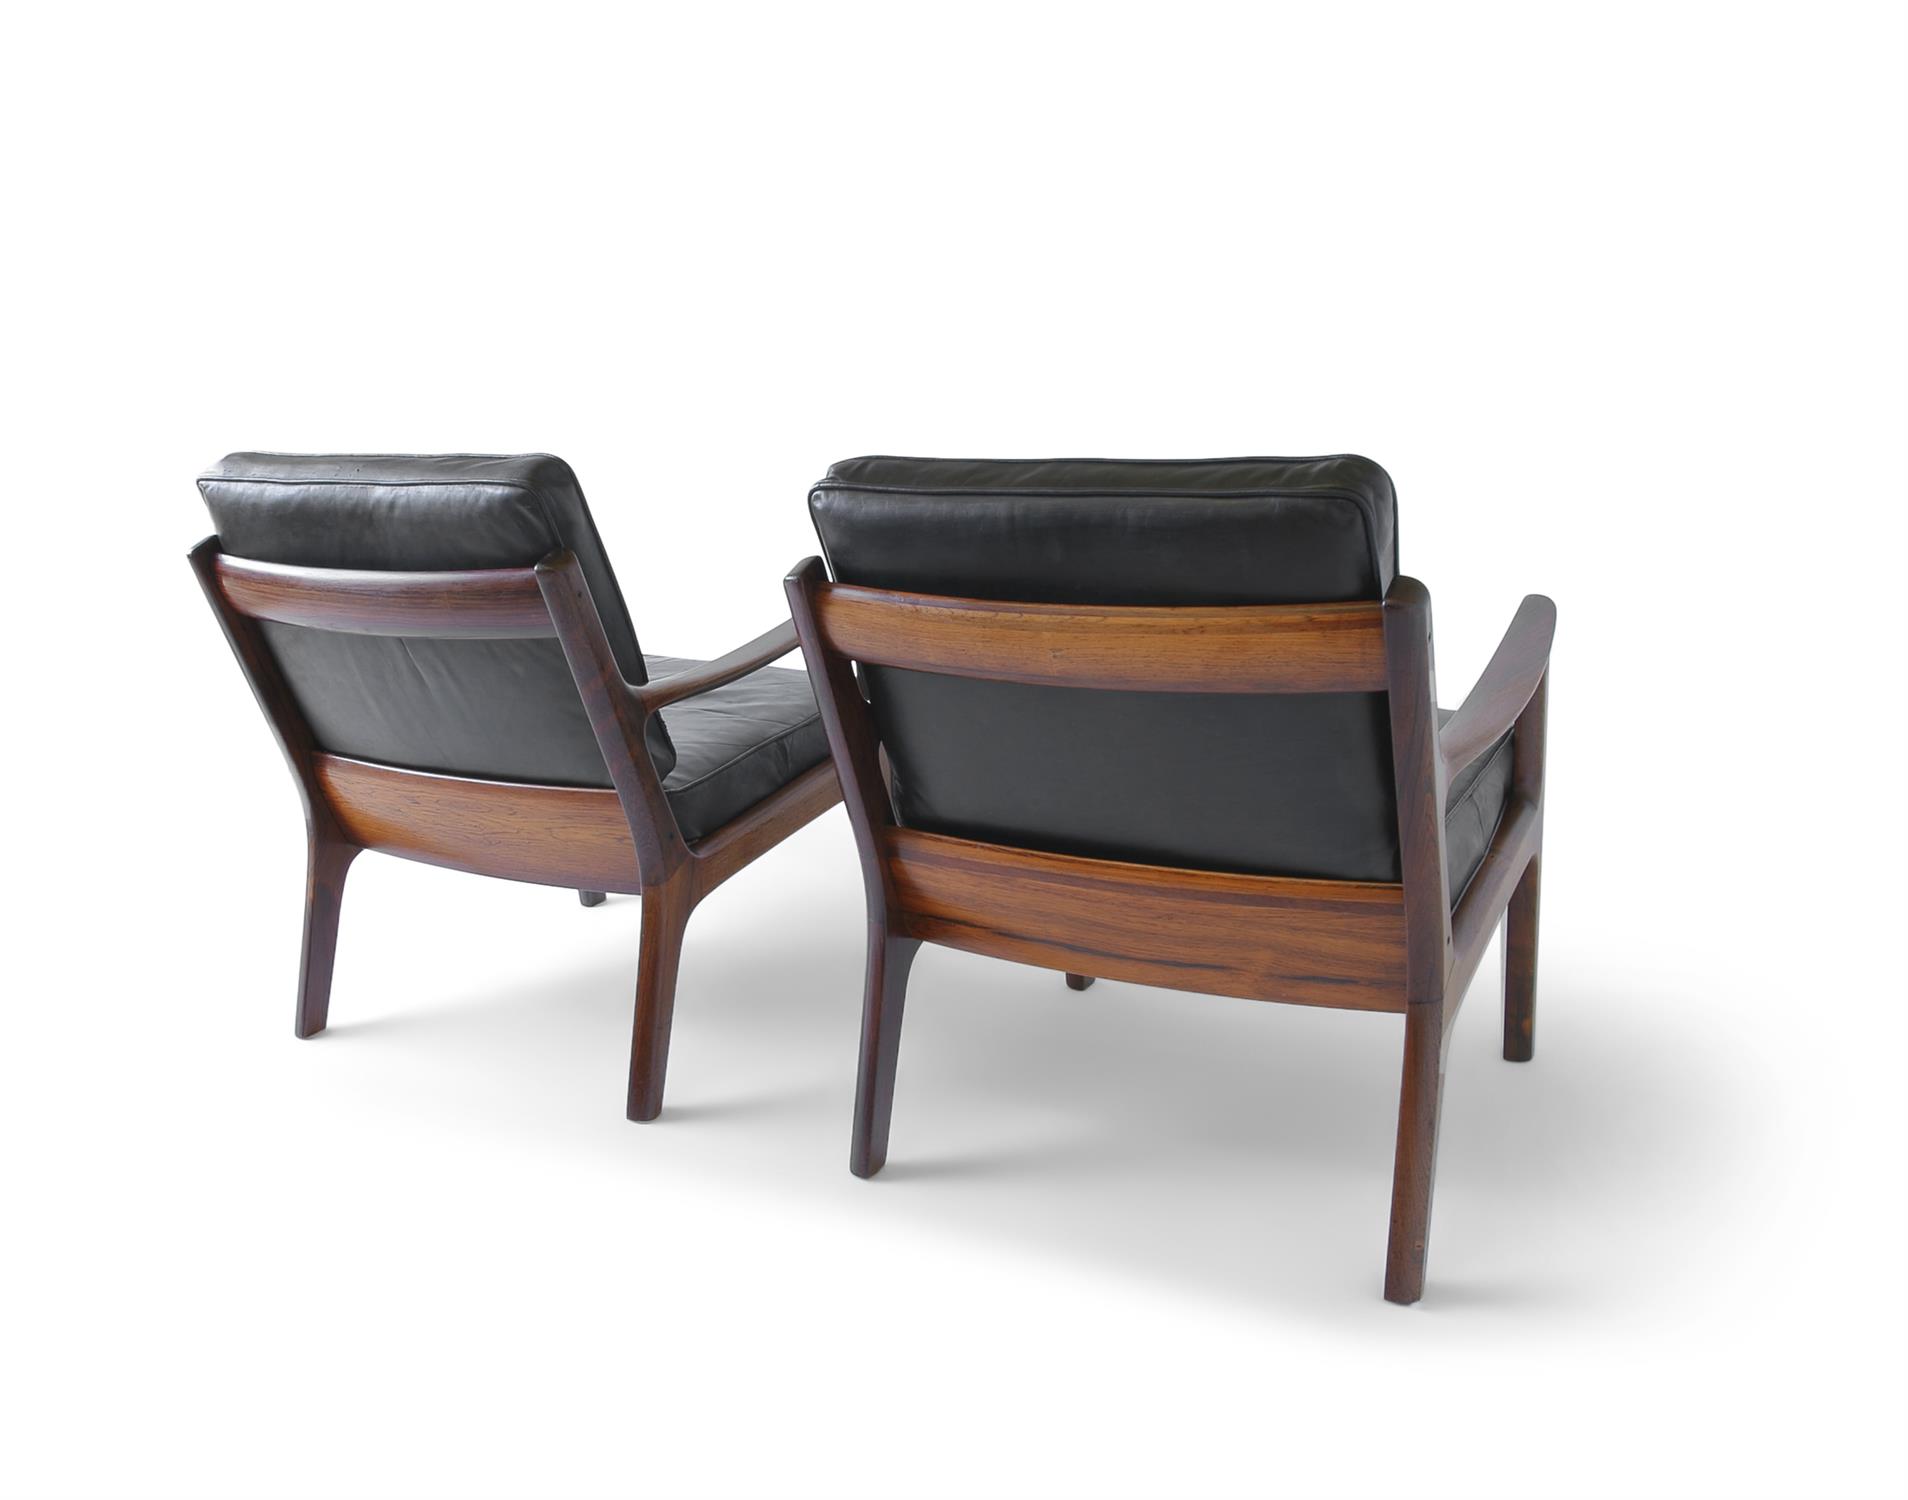 OLE WANSCHER A pair of Senator lounge chairs by Ole Wanscher, produced by France & Sons. Denmark, - Image 4 of 6